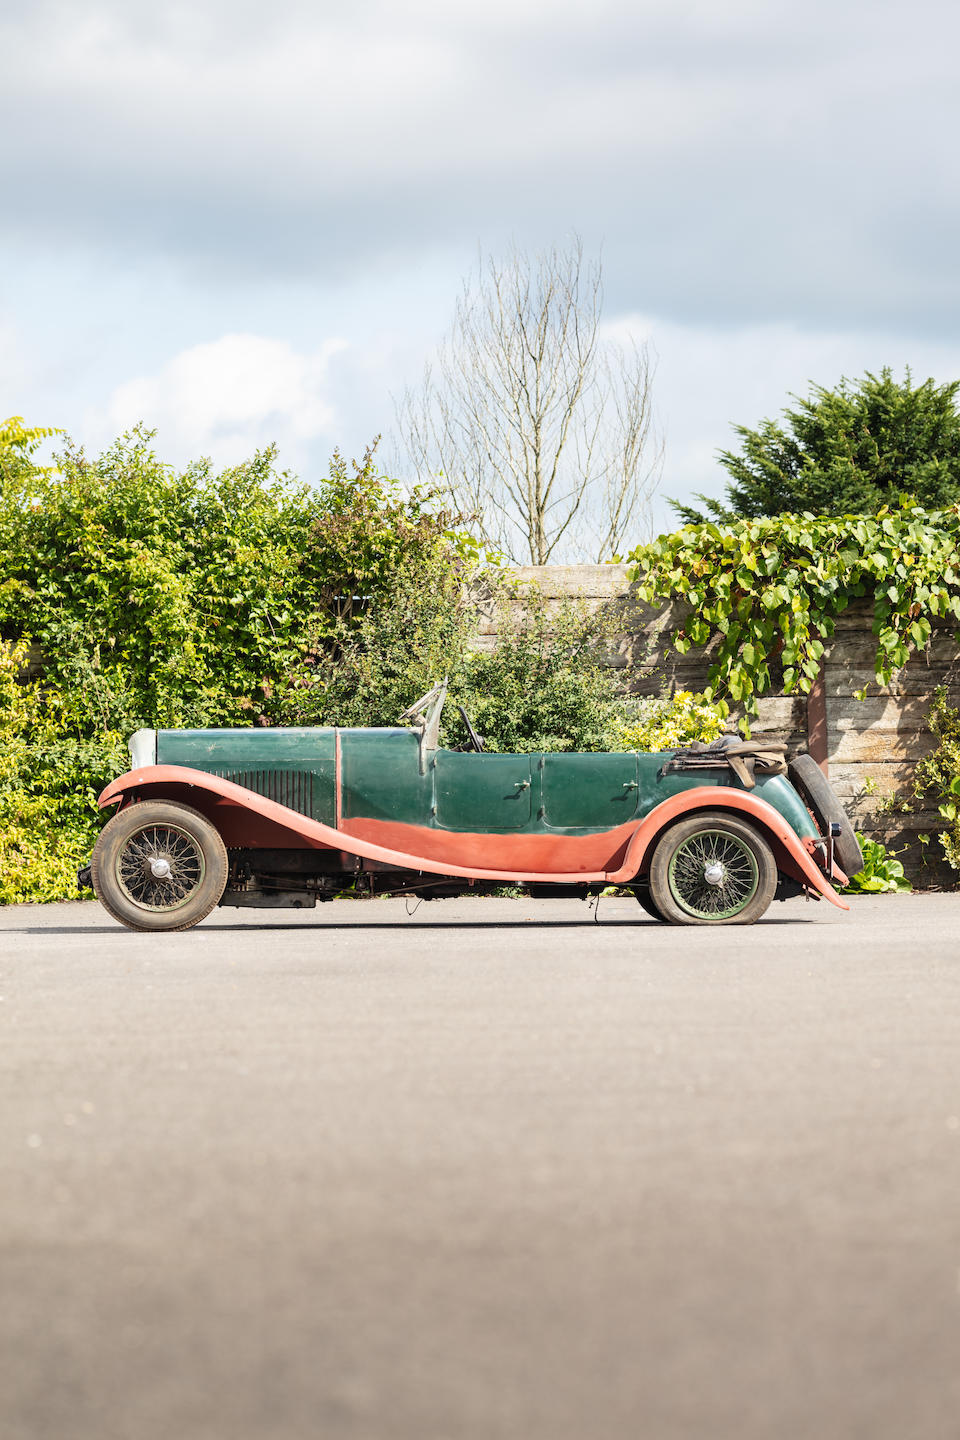 Property of a deceased's estate,1933 Lagonda 16/80 Tourer Project  Chassis no. S10444